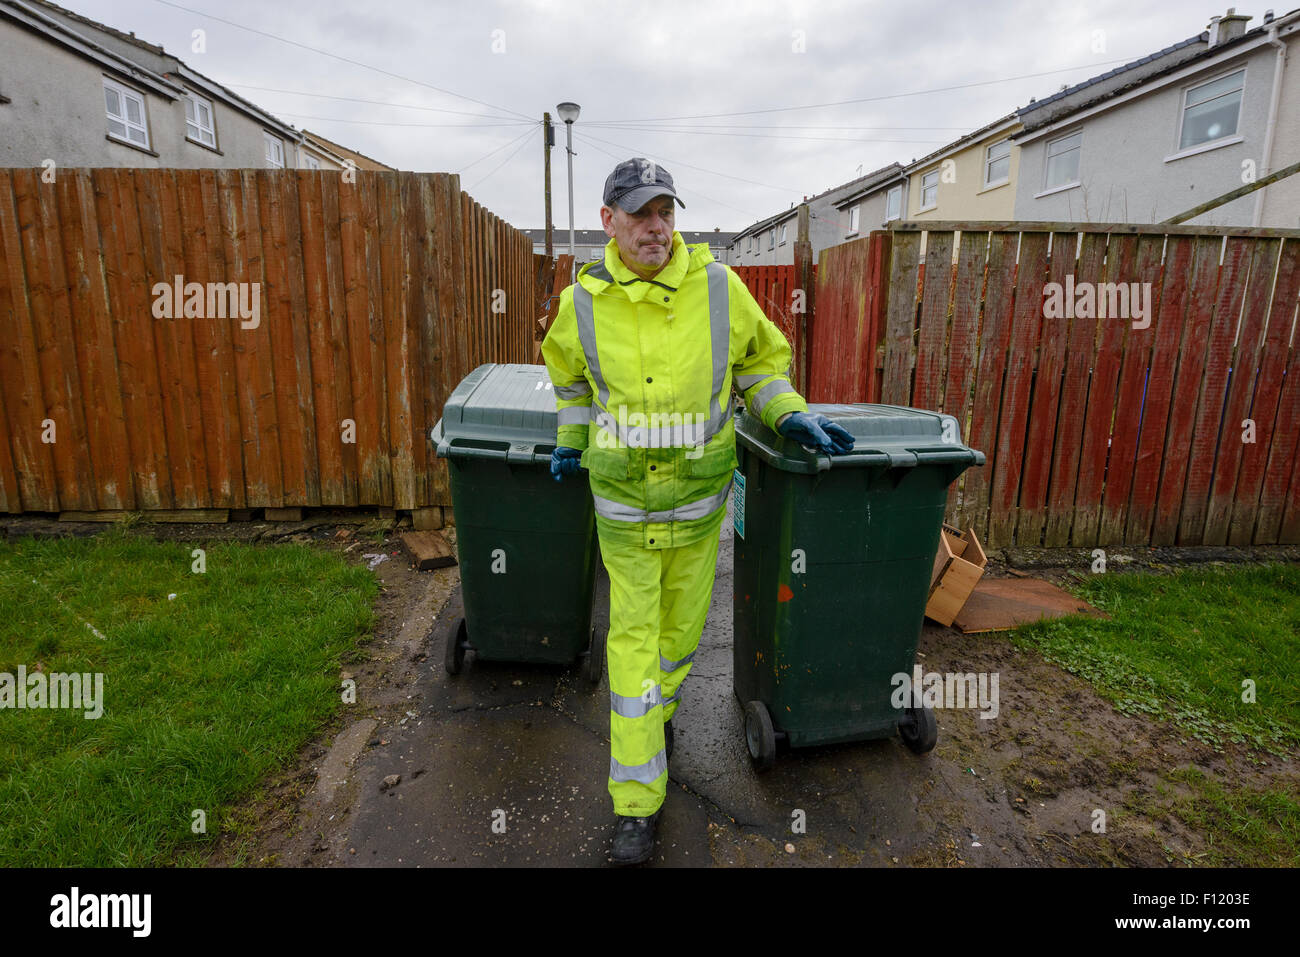 Bin men on thier refuse collection round in a small town in Scotland Stock Photo